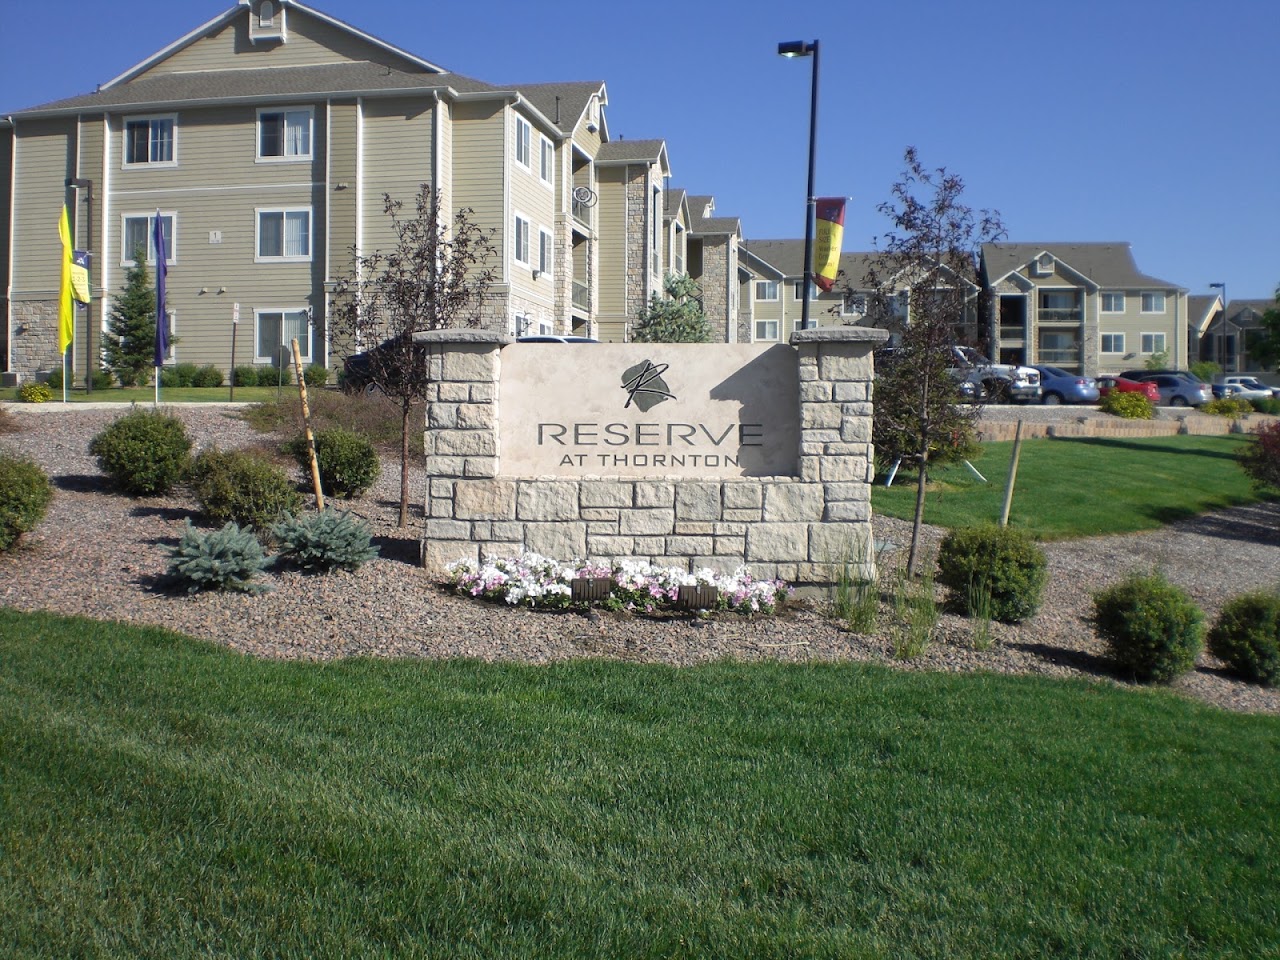 Photo of RESERVE AT THORNTON II. Affordable housing located at 9700 WELBY RD THORNTON, CO 80229